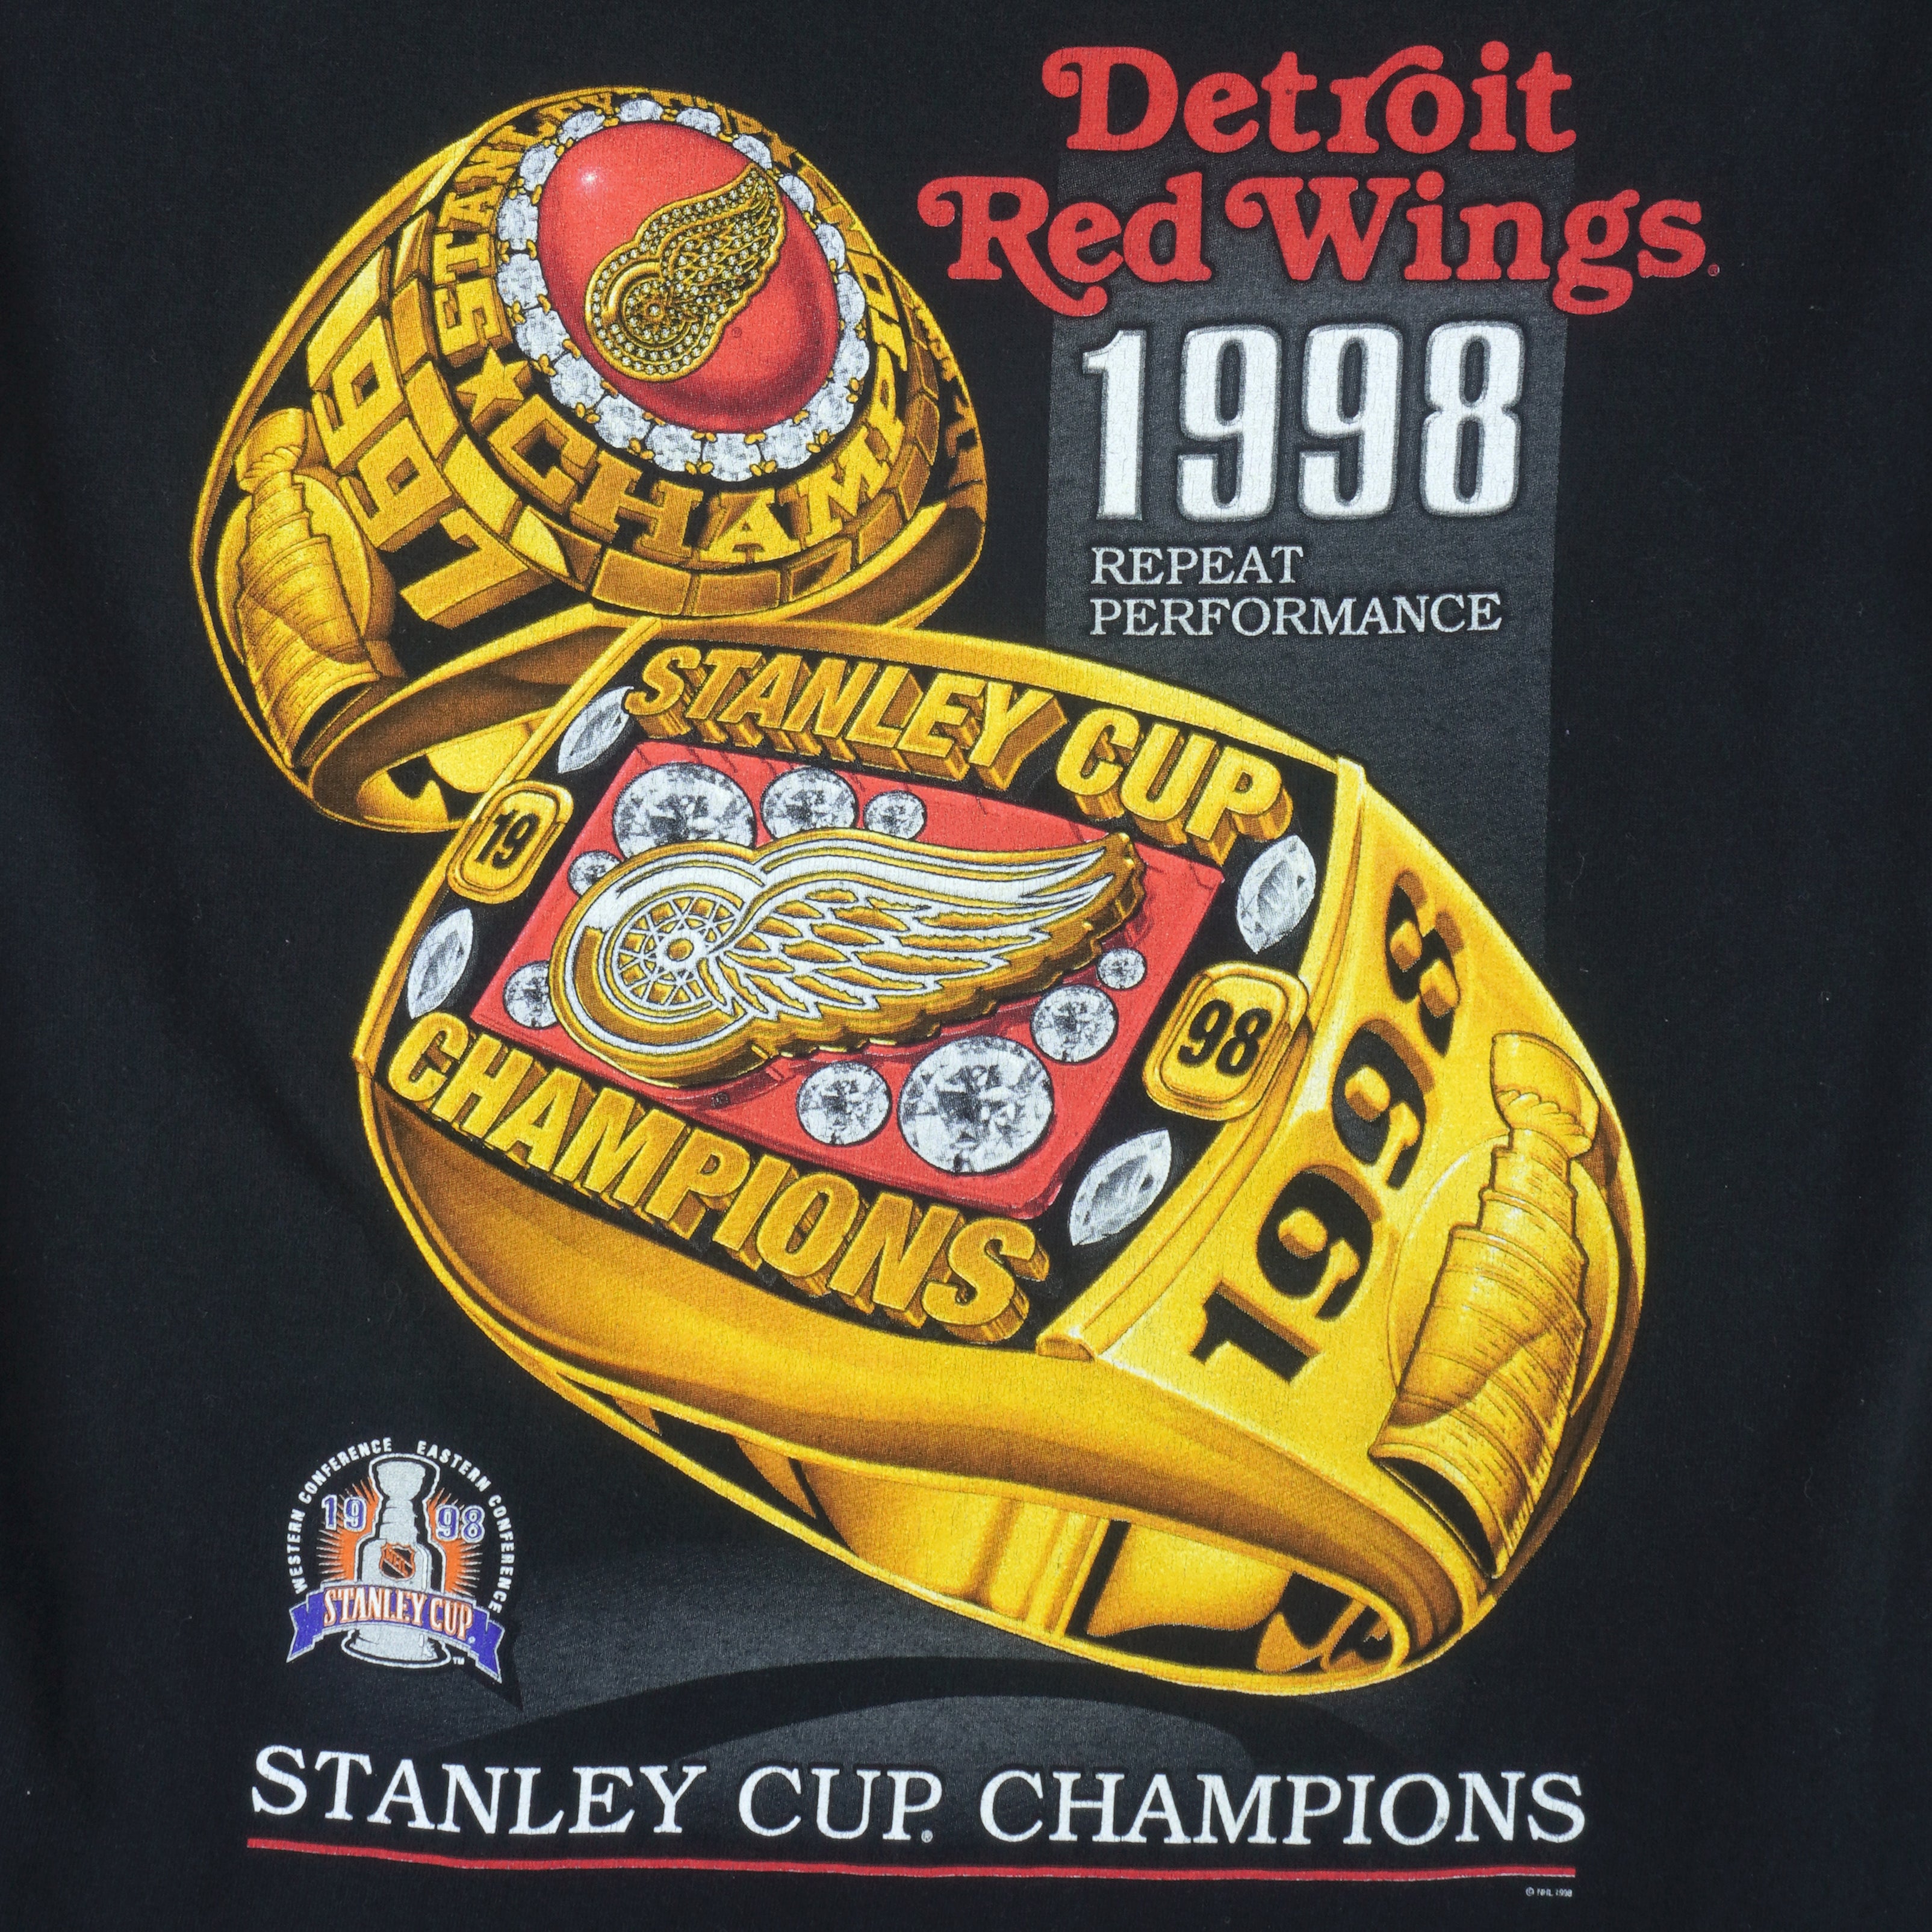 Vintage Detroit Red Wings 1997 Stanley Cup Champions Looney Tunes